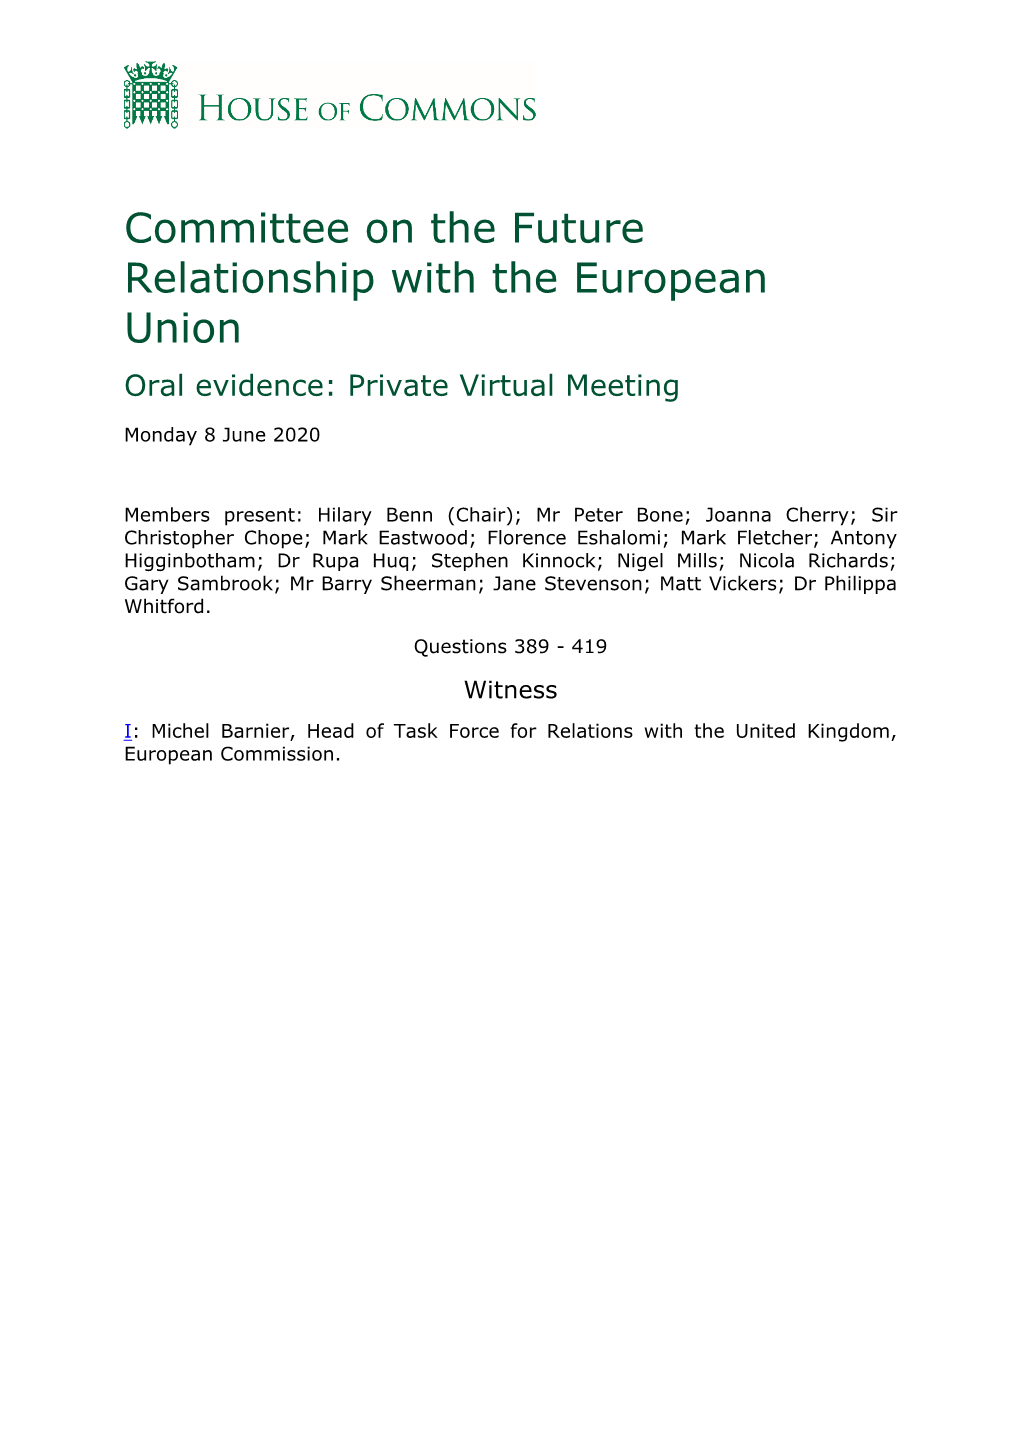 Committee on the Future Relationship with the European Union Oral Evidence: Private Virtual Meeting